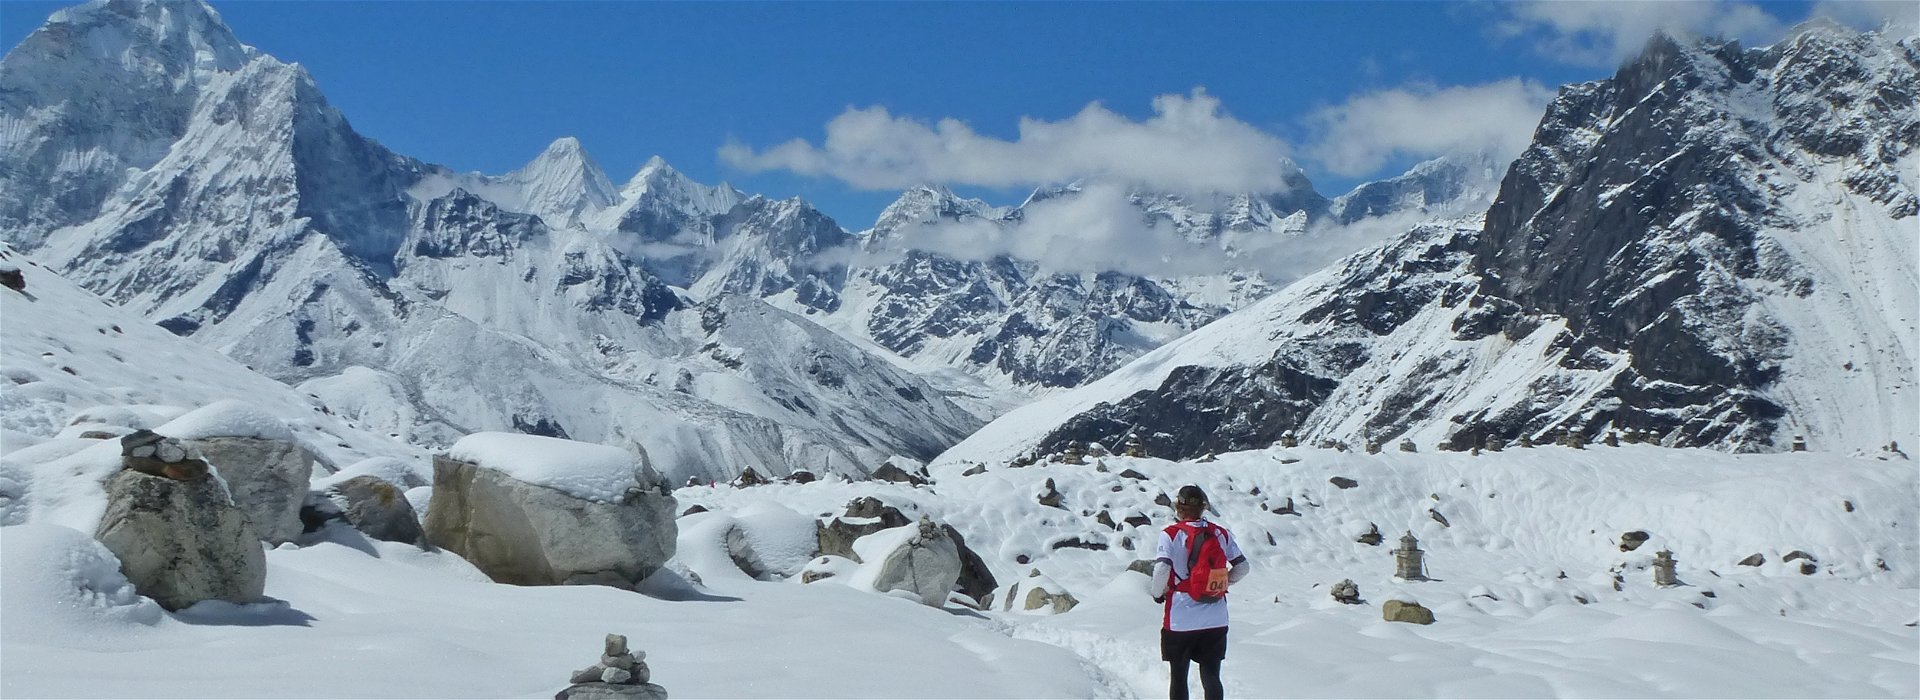 Why The Mount Everest Marathon Isn’t Just For Runners